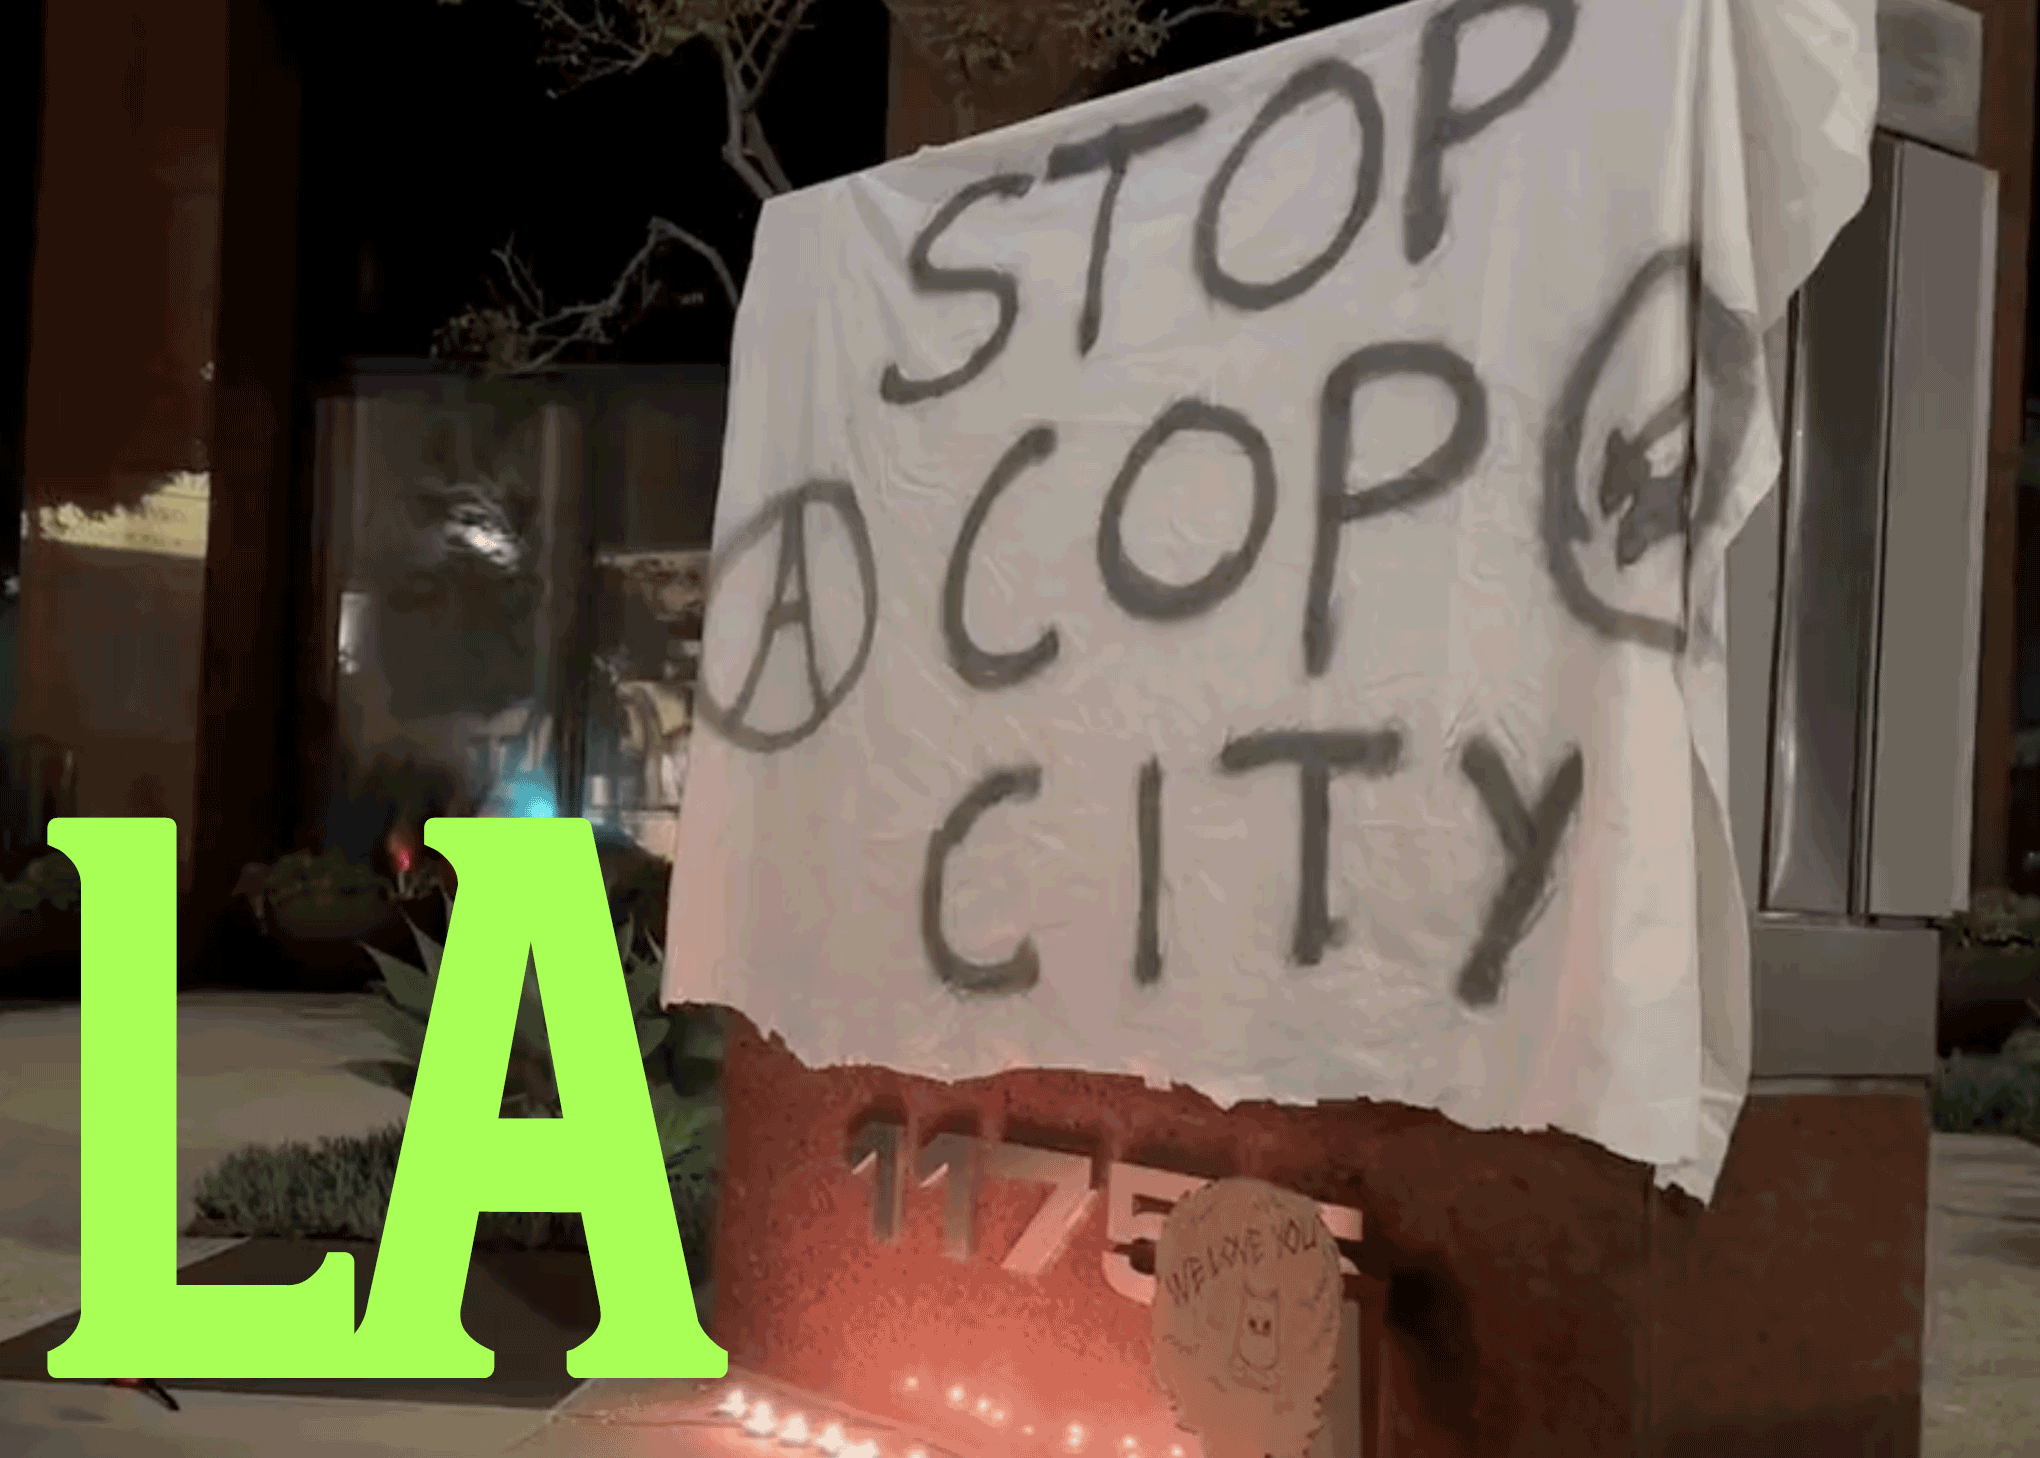 A white banner with black text spells out "STOP COP CITY" with an anarchist circle-A and a three arrows symbol in a circle. In the bottom left corners, "LA" is spelled in green letters.